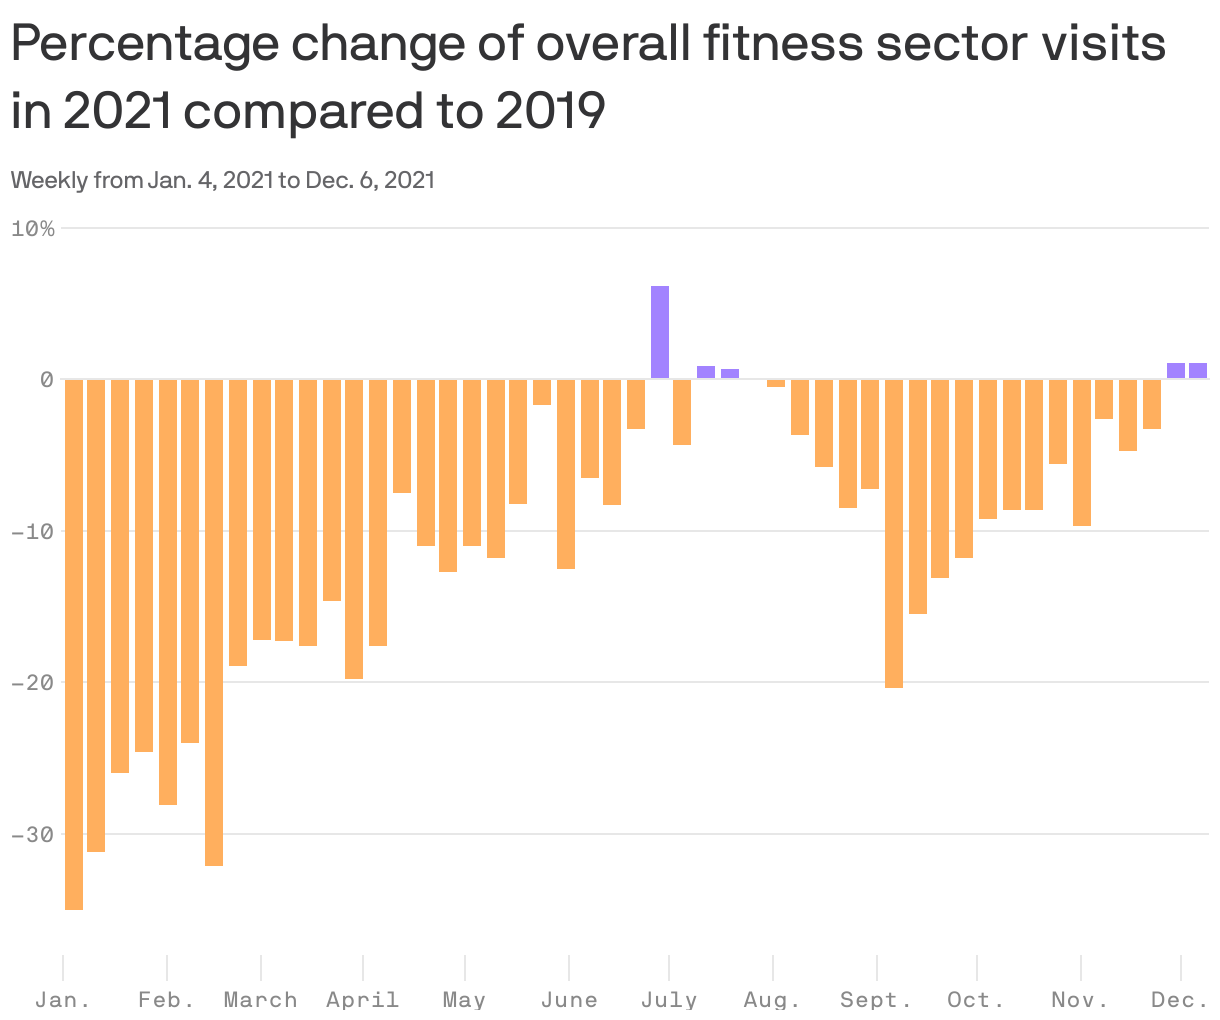 Percentage change of overall fitness sector visits in 2021 compared to 2019